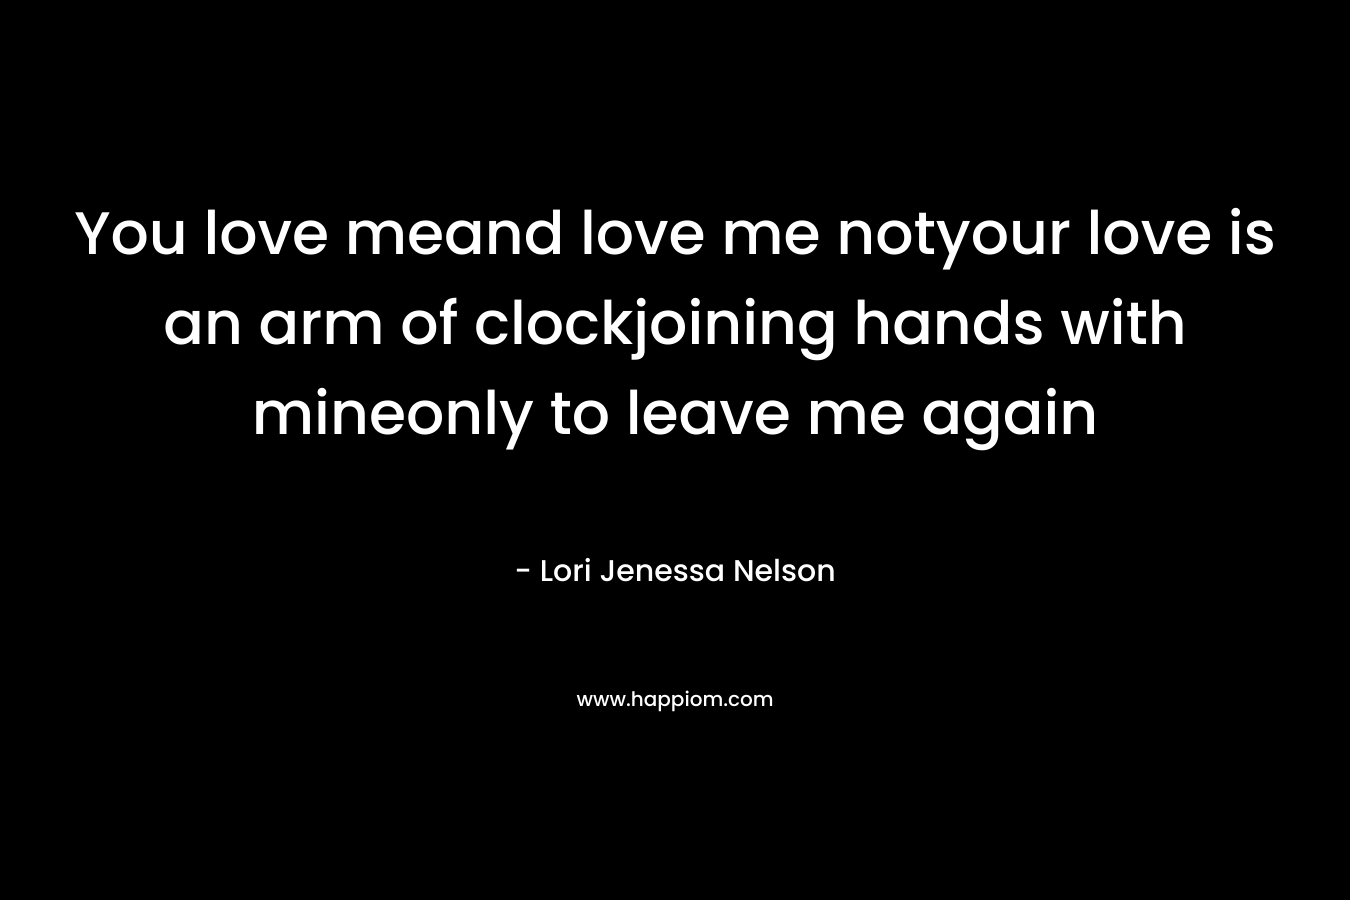 You love meand love me notyour love is an arm of clockjoining hands with mineonly to leave me again – Lori Jenessa Nelson